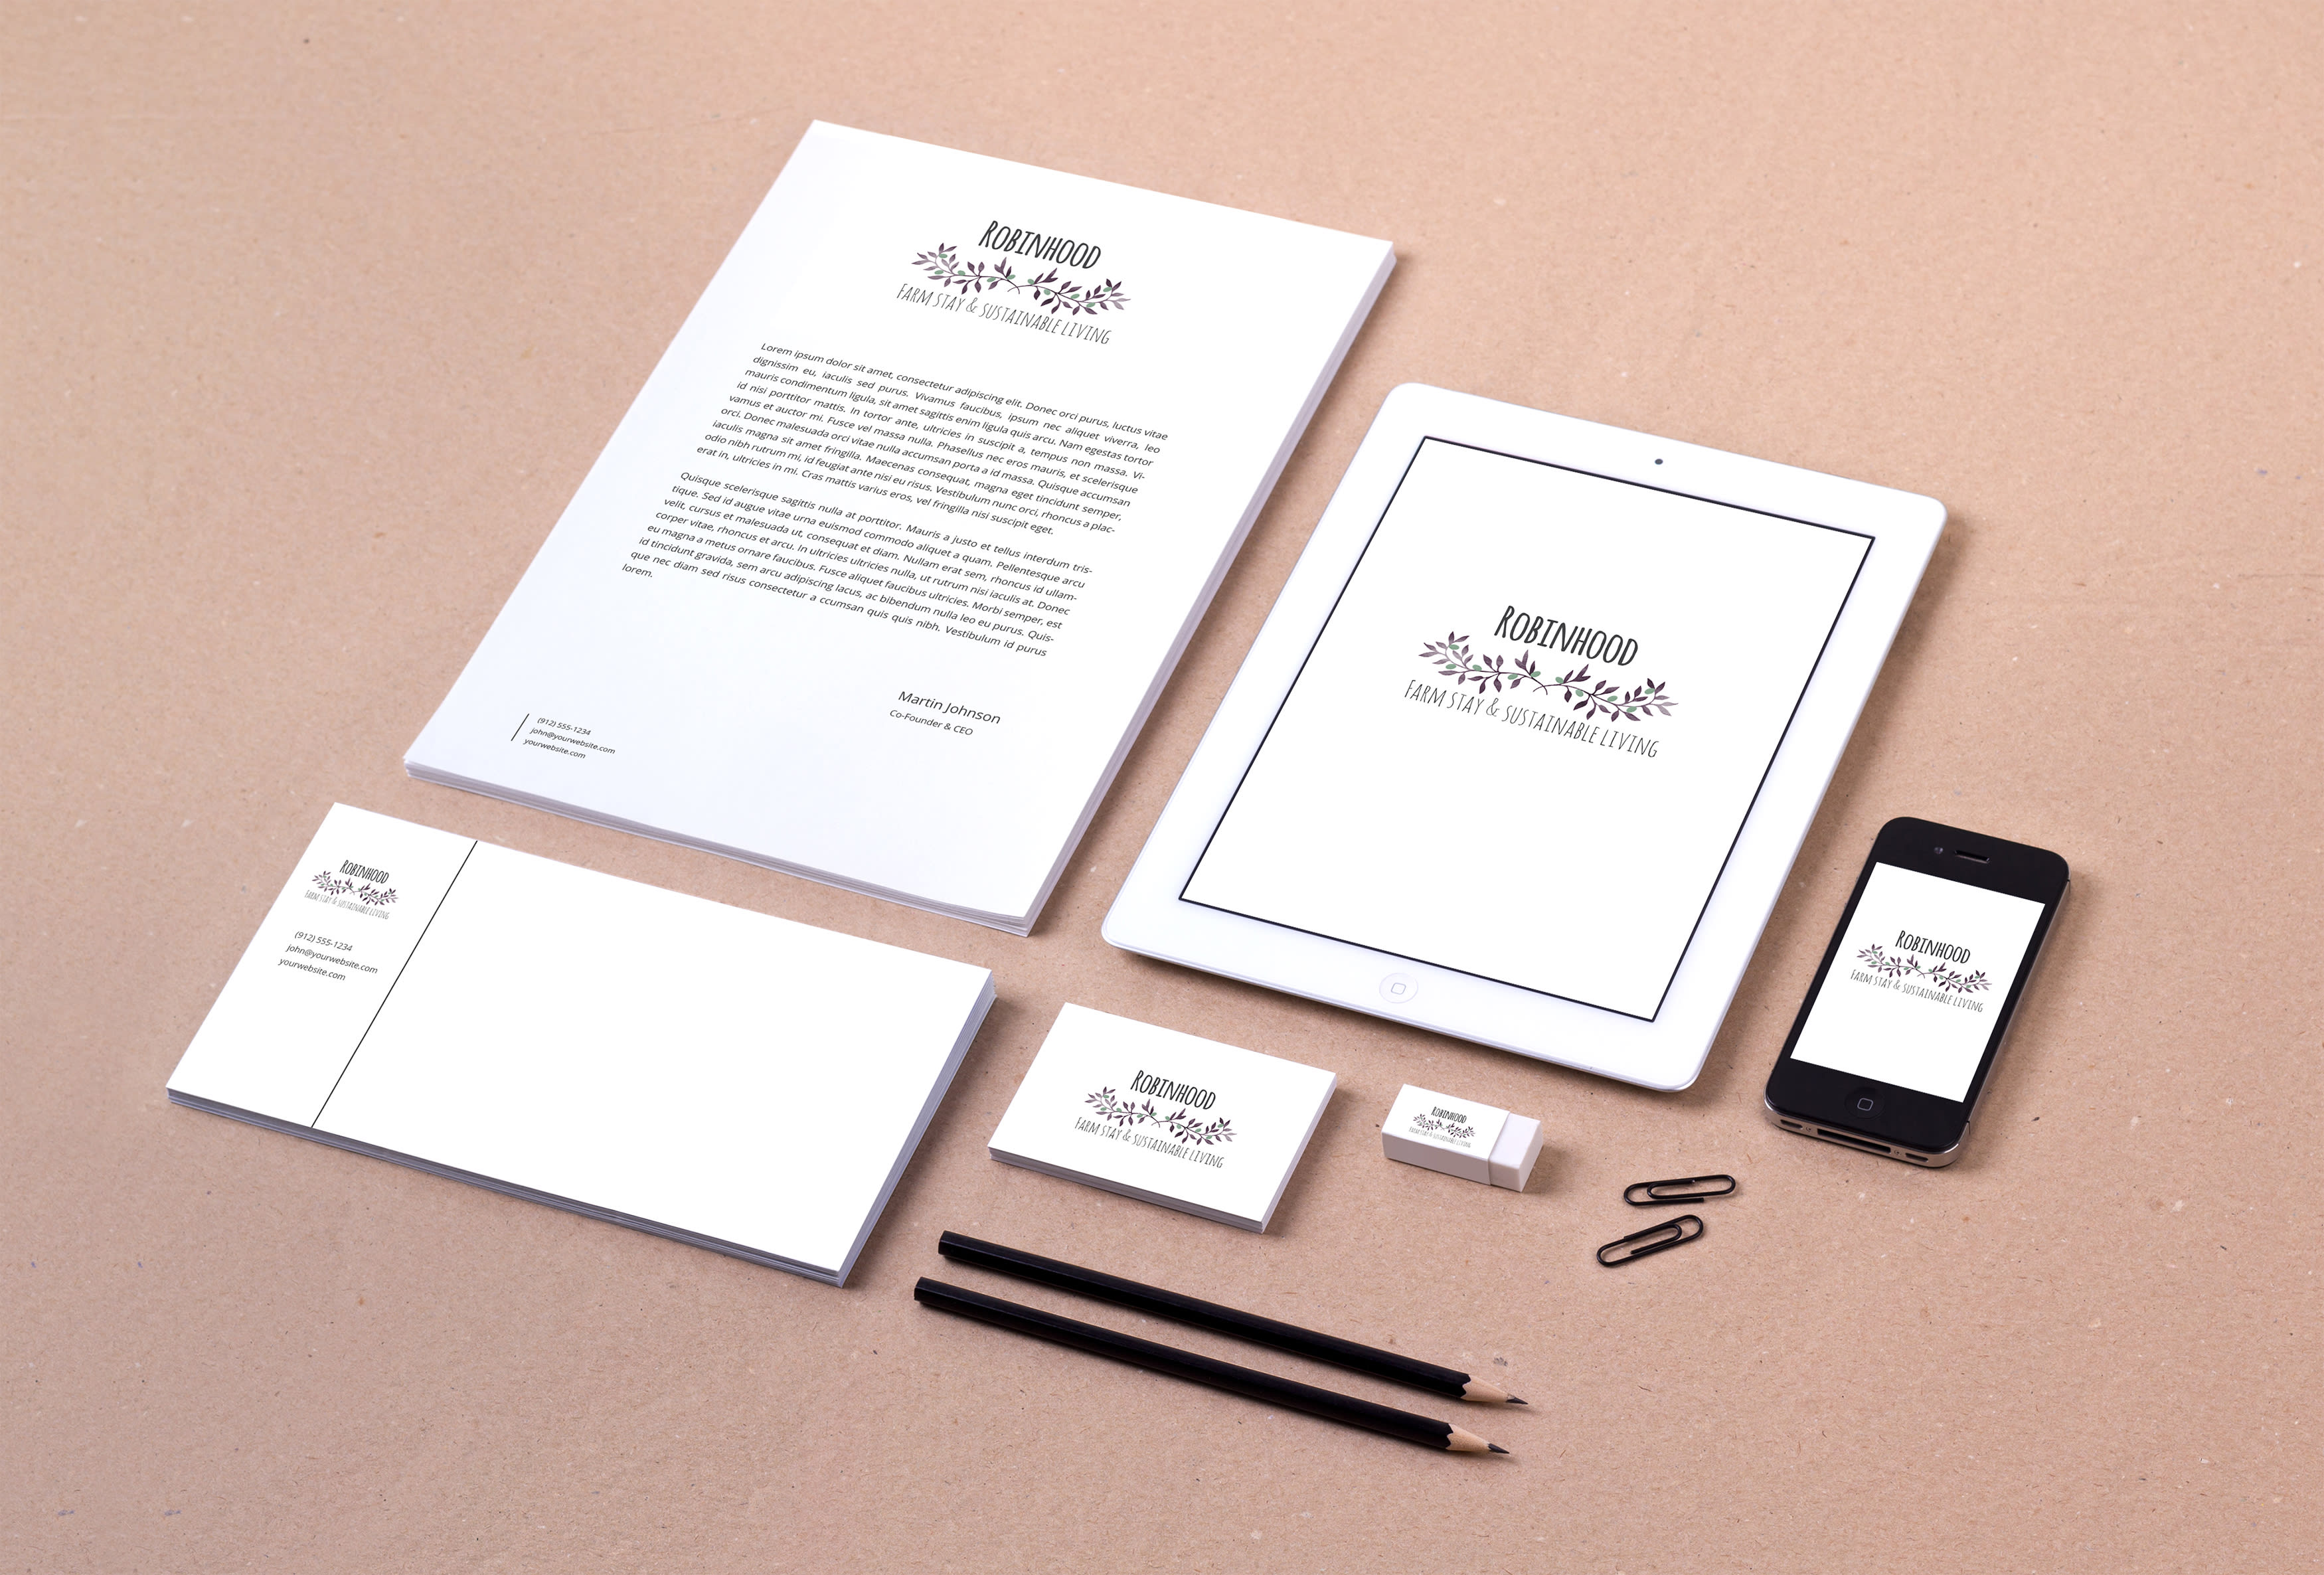 Download Design Your Corporate Brand Identity Mockup By Katiemiller01 Fiverr